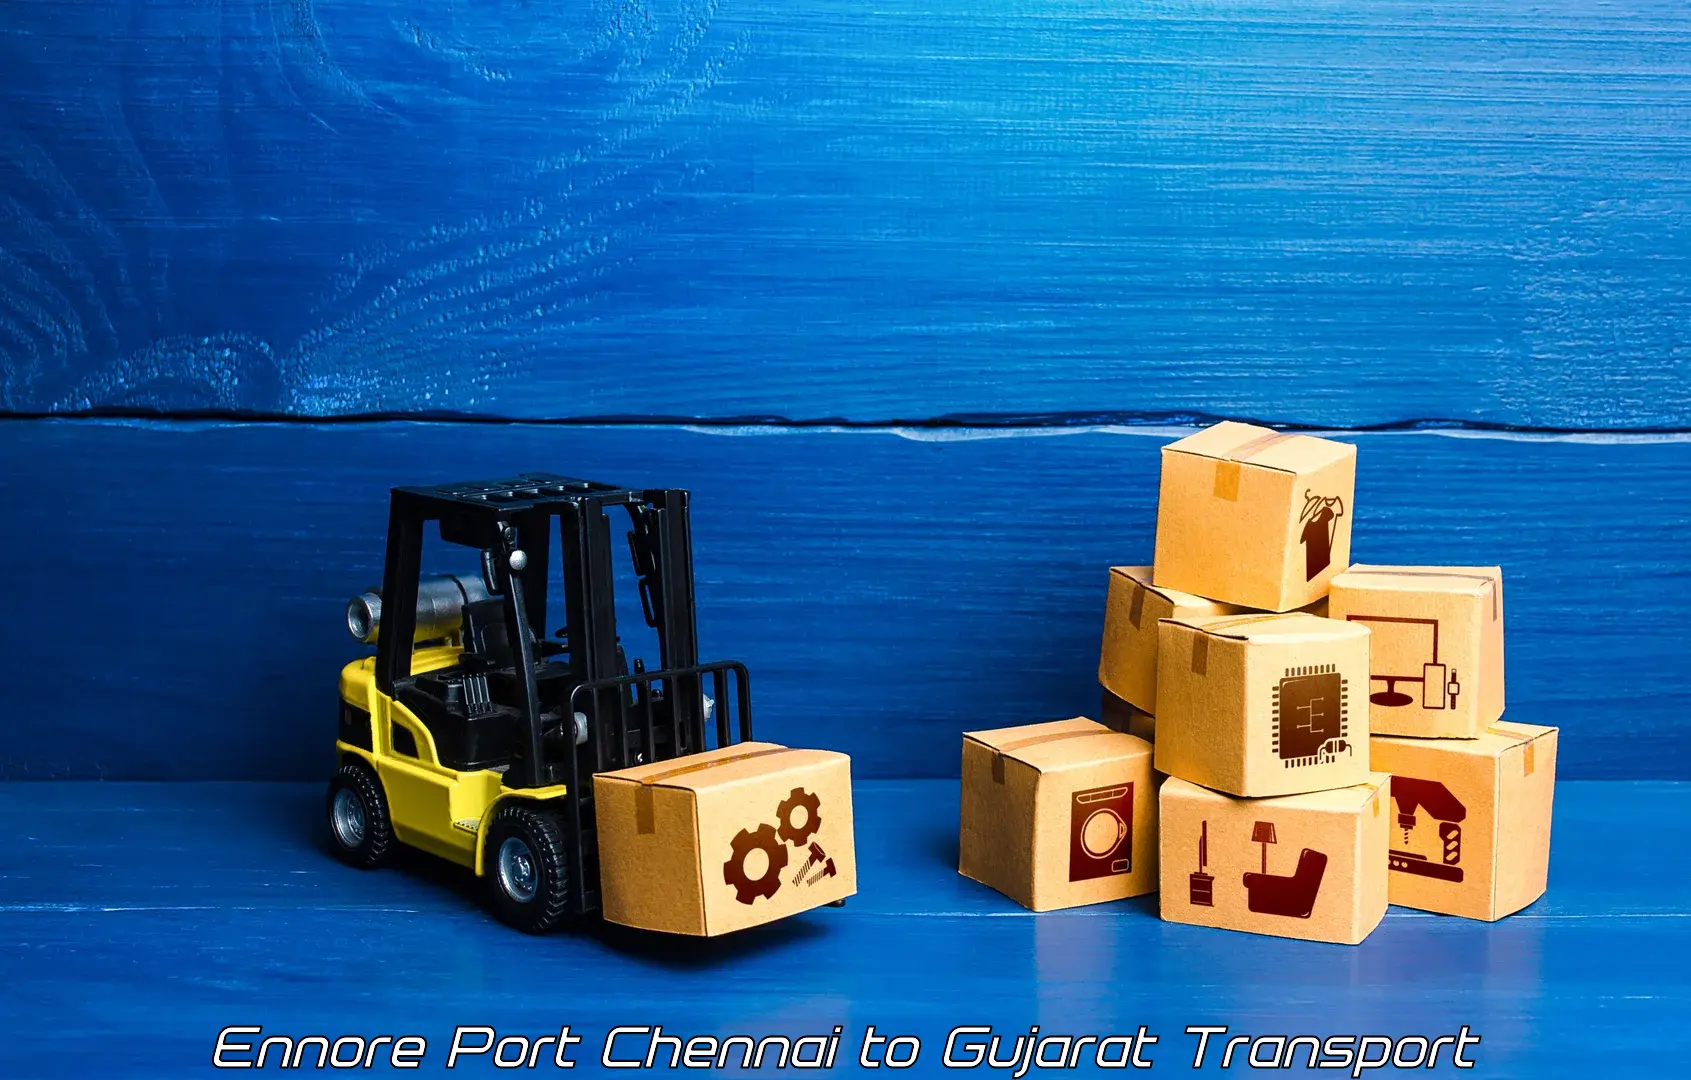 Door to door transport services Ennore Port Chennai to Patdi